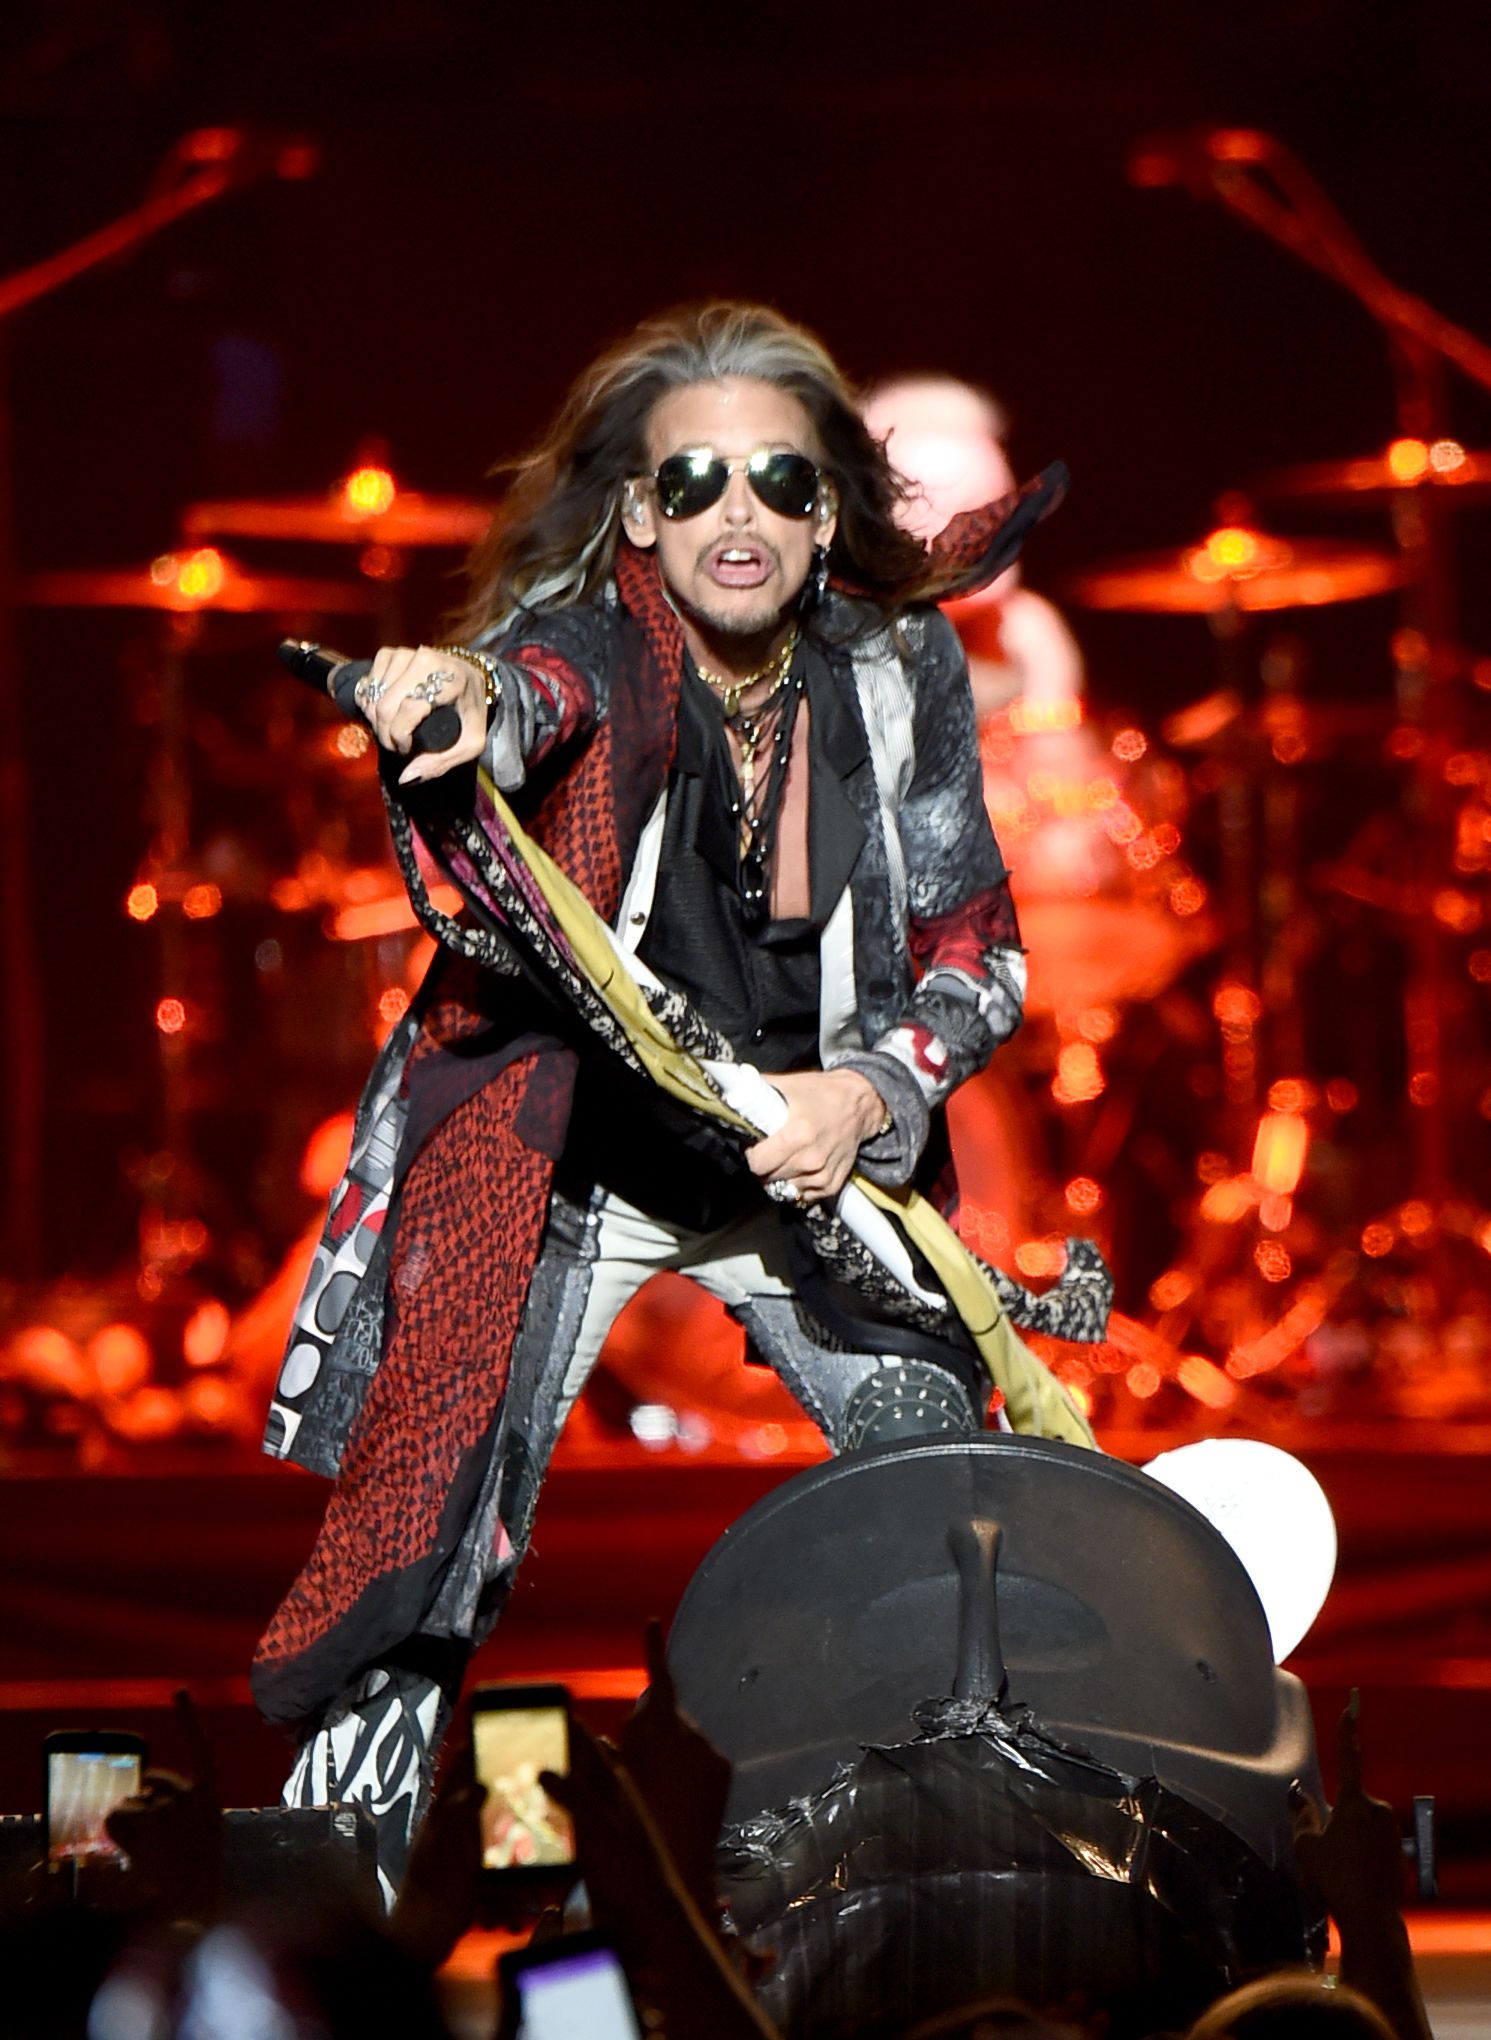 PHOENIX, AZ - APRIL 02: Steven Tyler of Aerosmith performs at the Capital One JamFest during the NCAA March Madness Music Festival 2017 on April 2, 2017 in Phoenix, Arizona. (Photo by Michael Loccisano/Getty Images for Turner Sports)